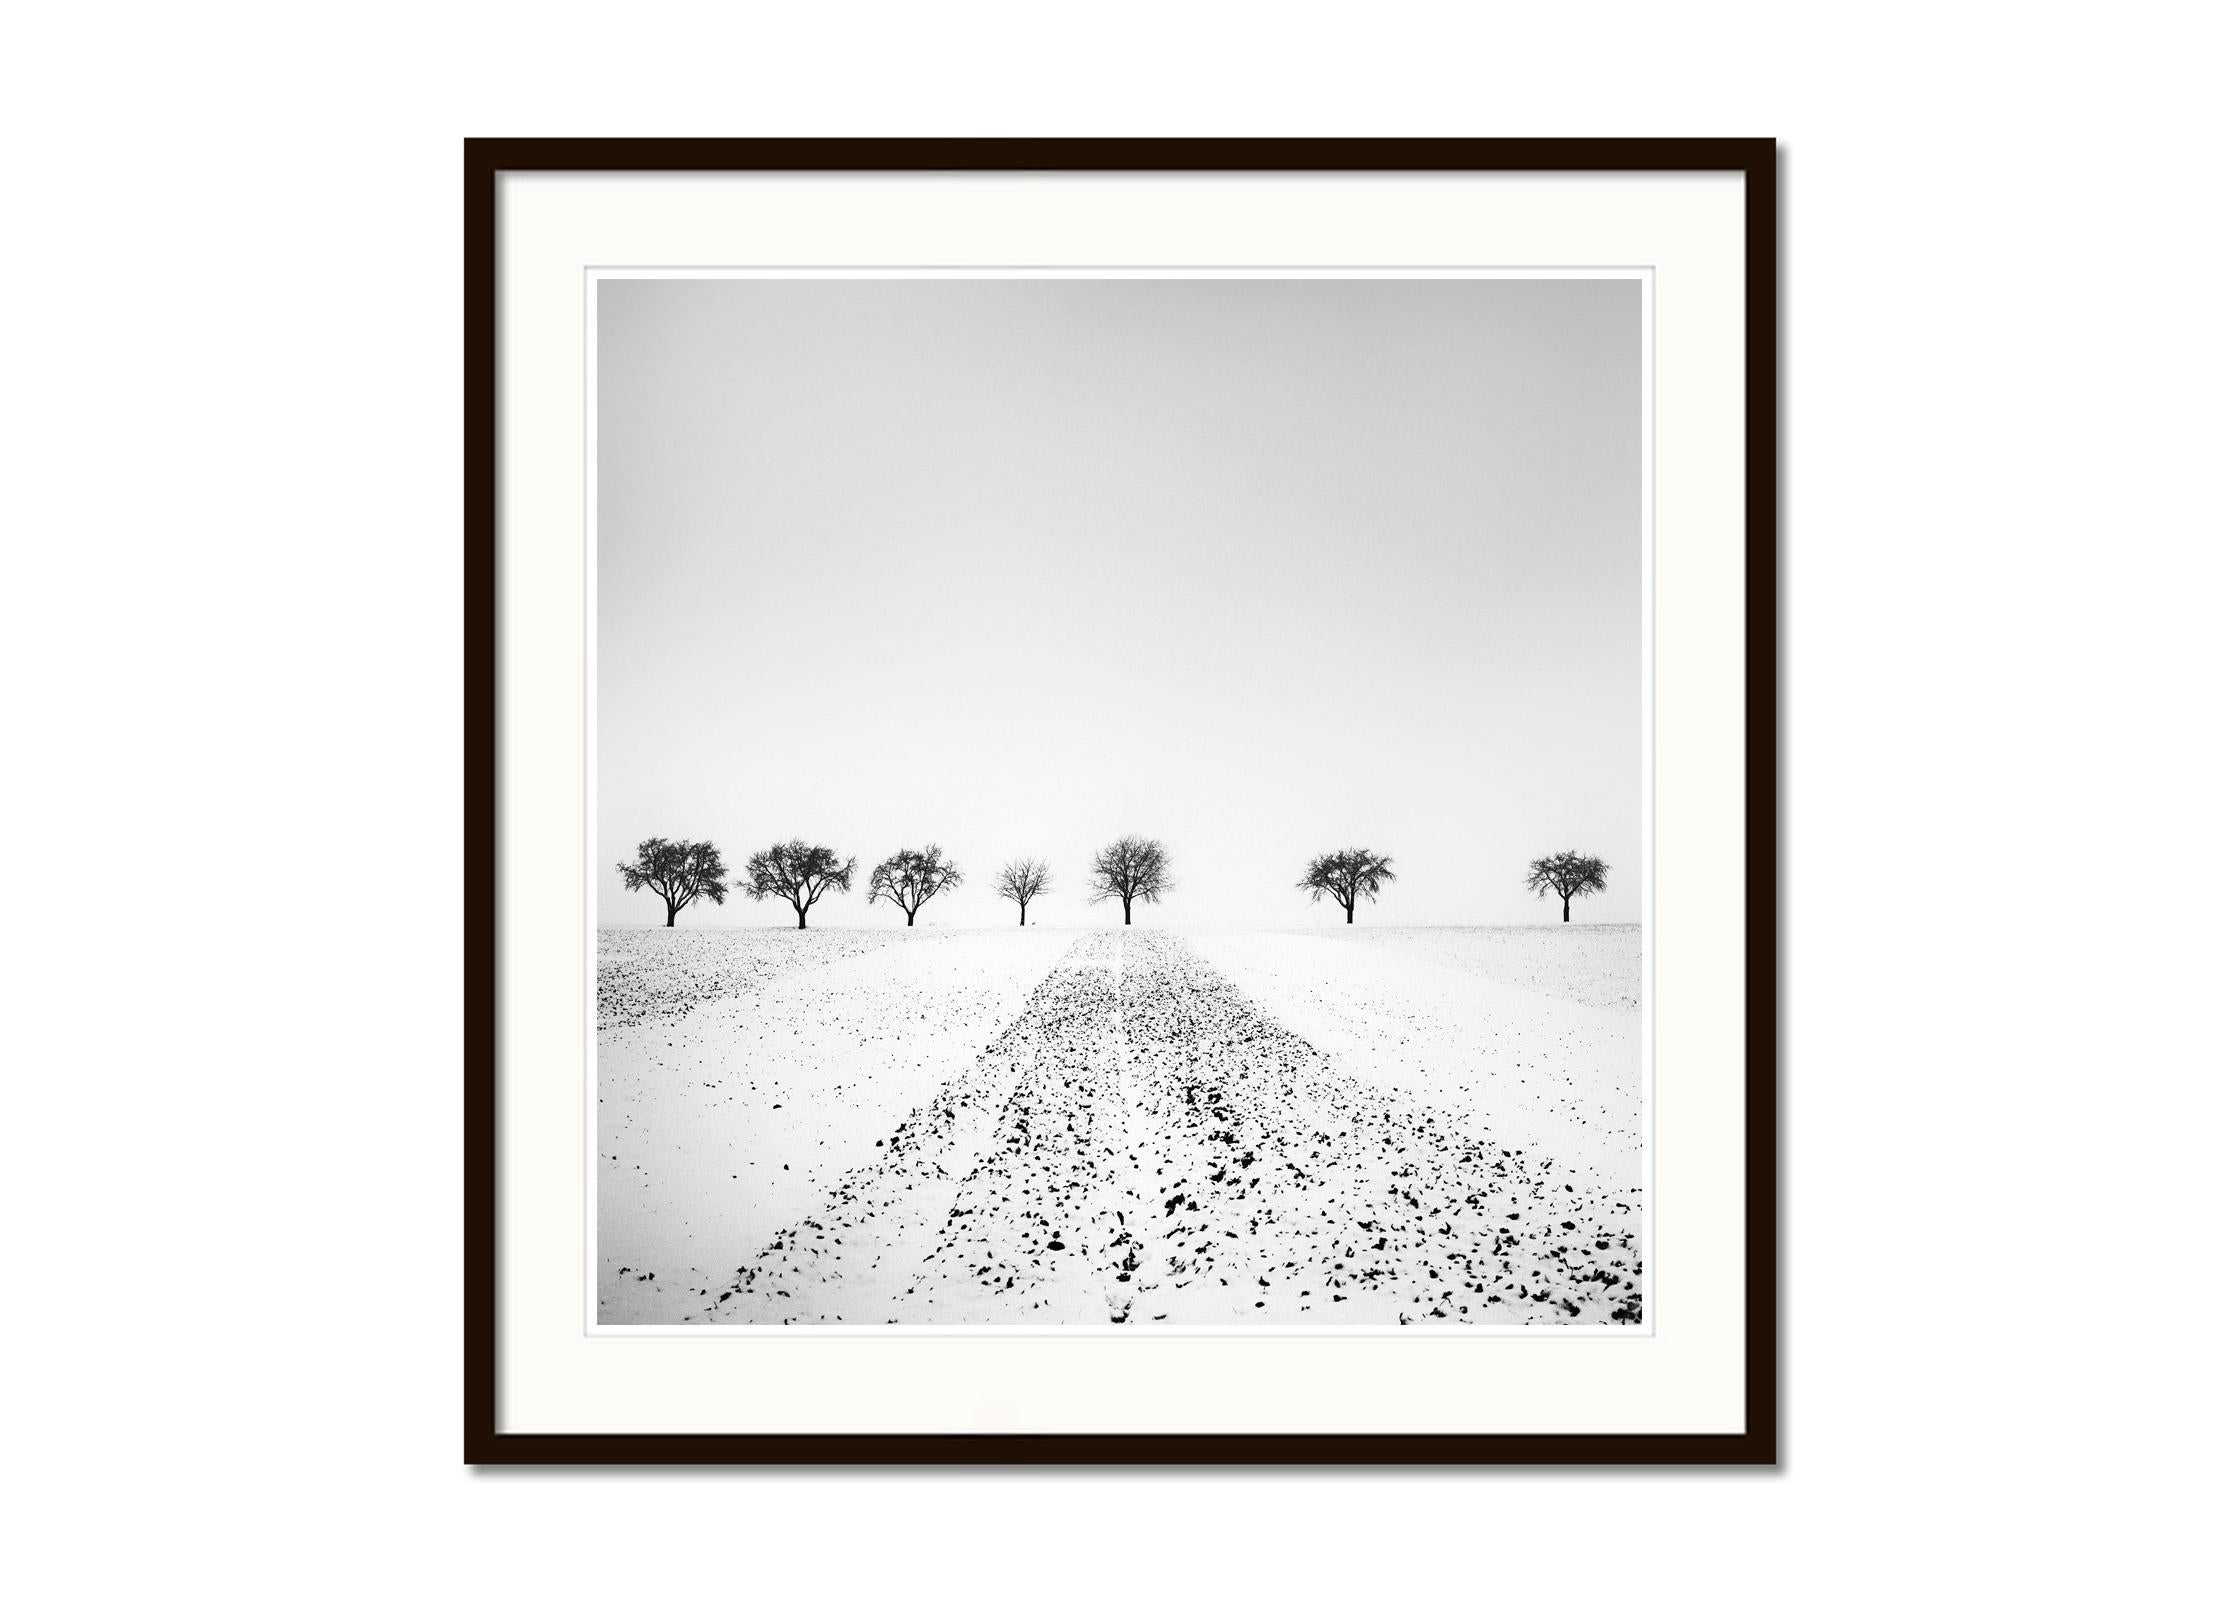 Trees in snowy Field, Winterland, black and white, landscape photography, print - Gray Landscape Photograph by Gerald Berghammer